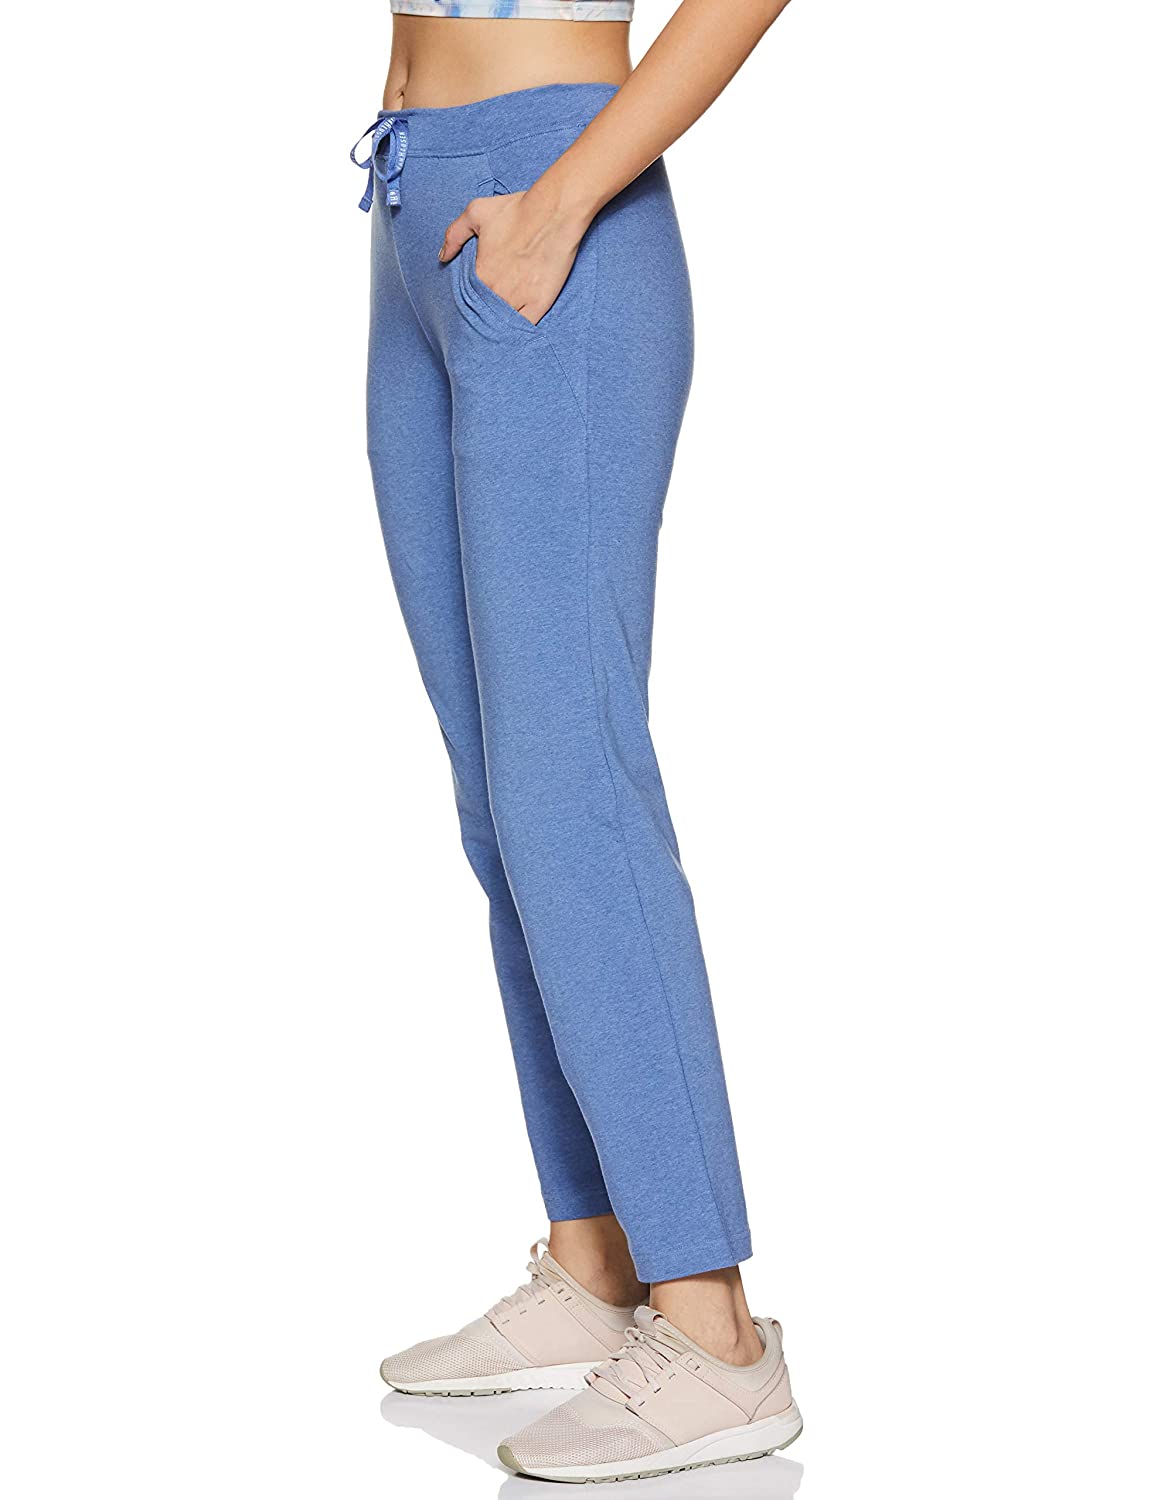 Van Heusen Athleisure Stretch Lounge Pants With Pockets